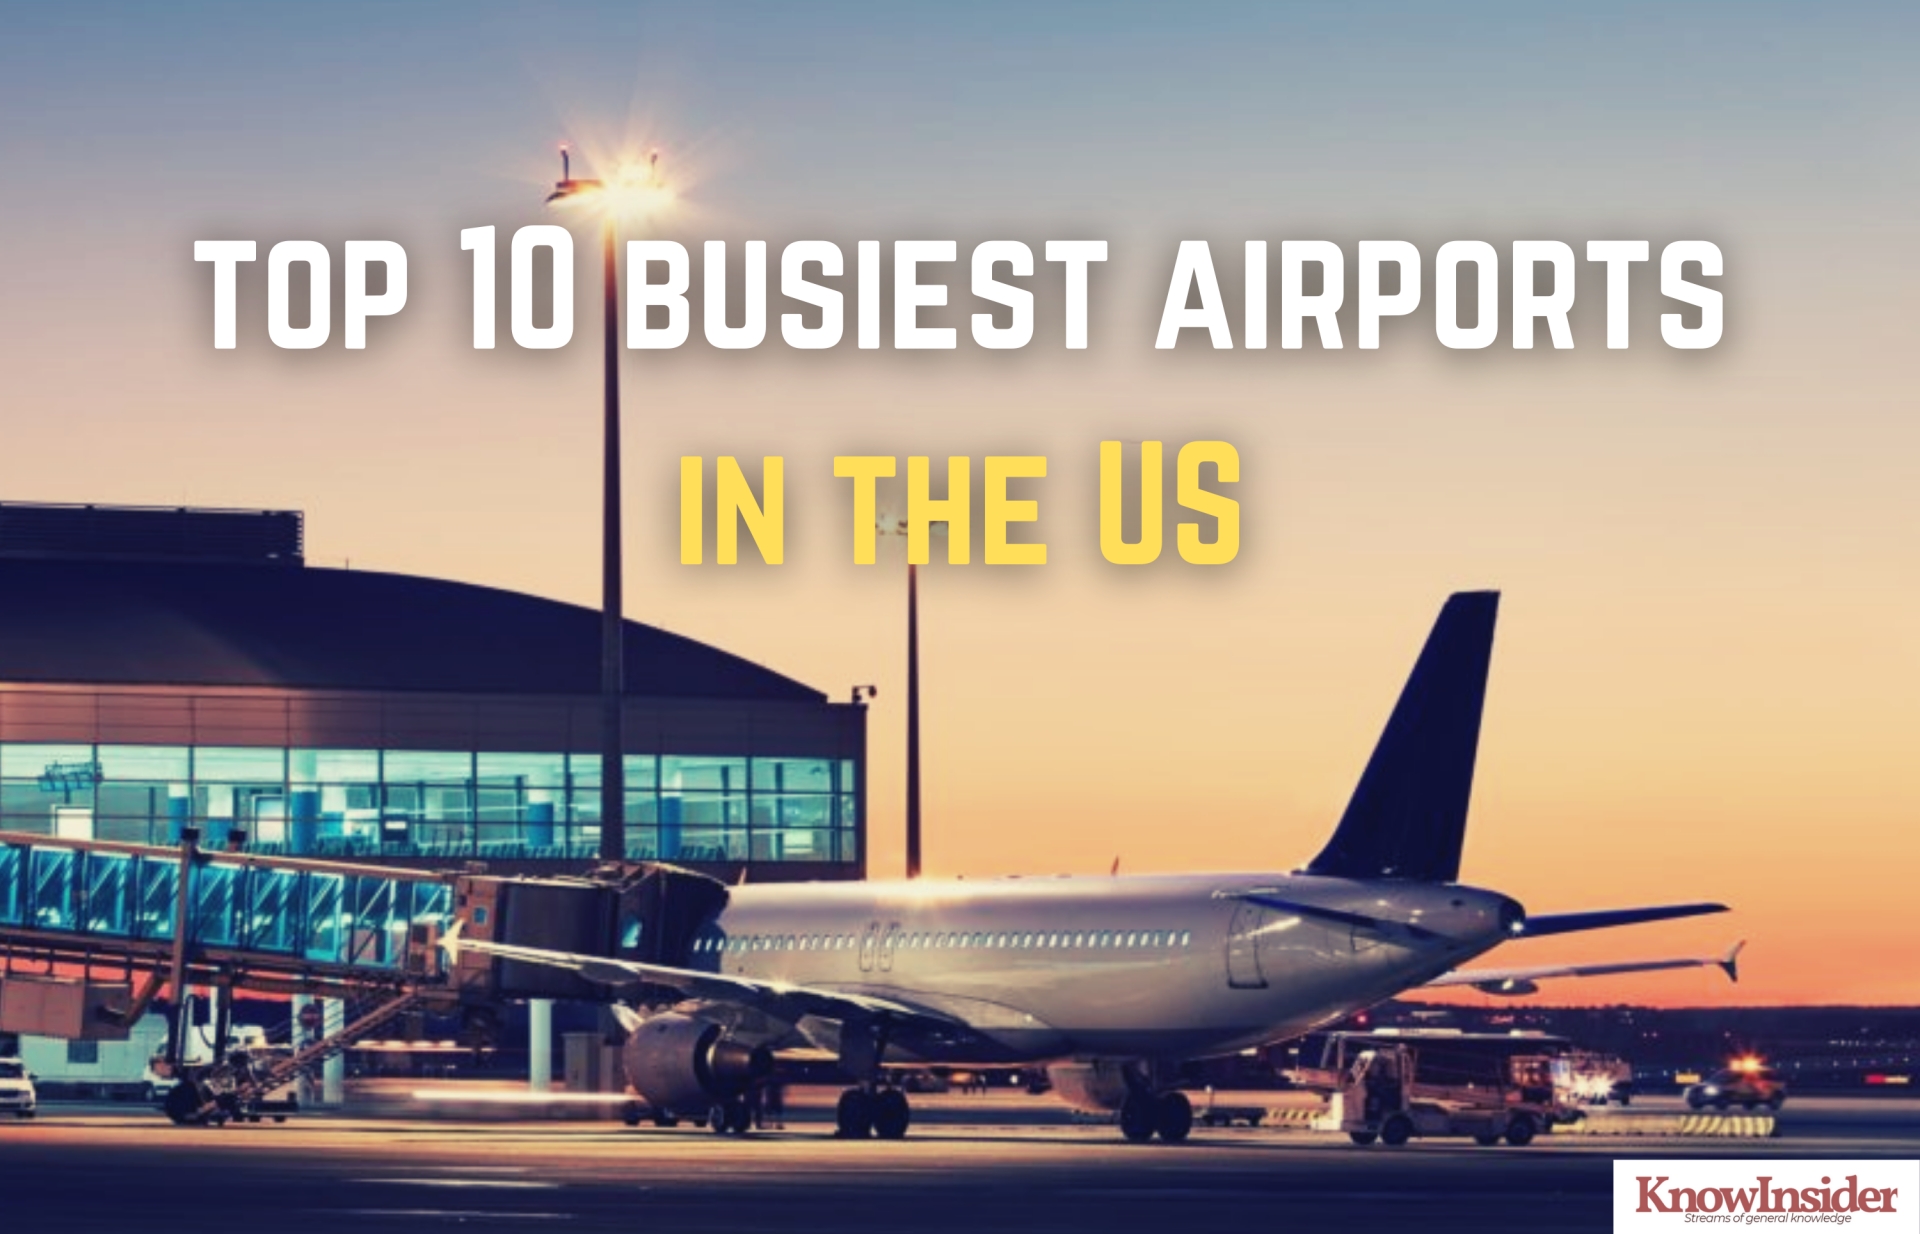 Top 10 Busiest AirPorts in the U.S Based on Passengers